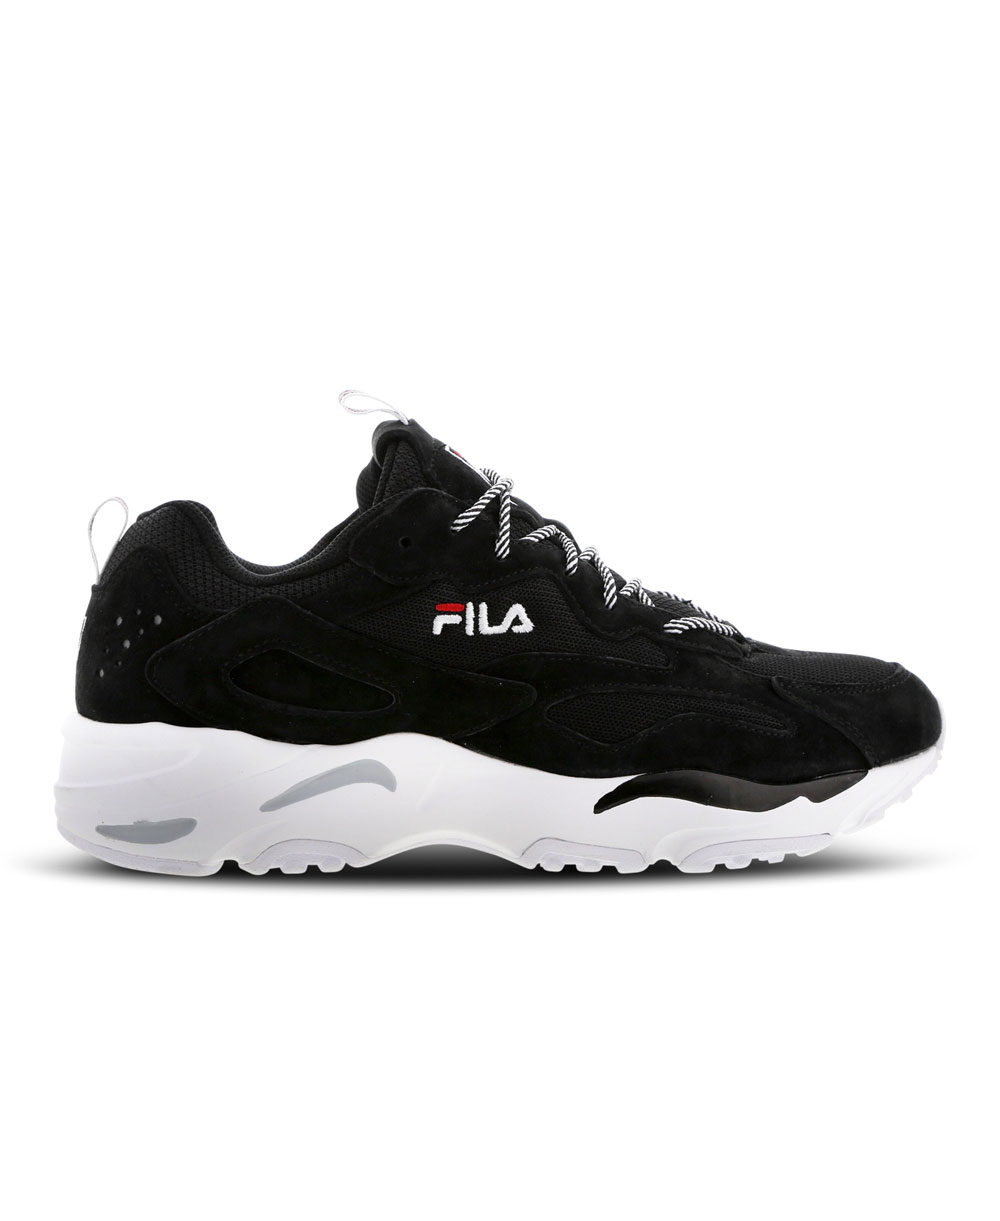 Fila Men's Ray Tracer Sneakers Shoes Black